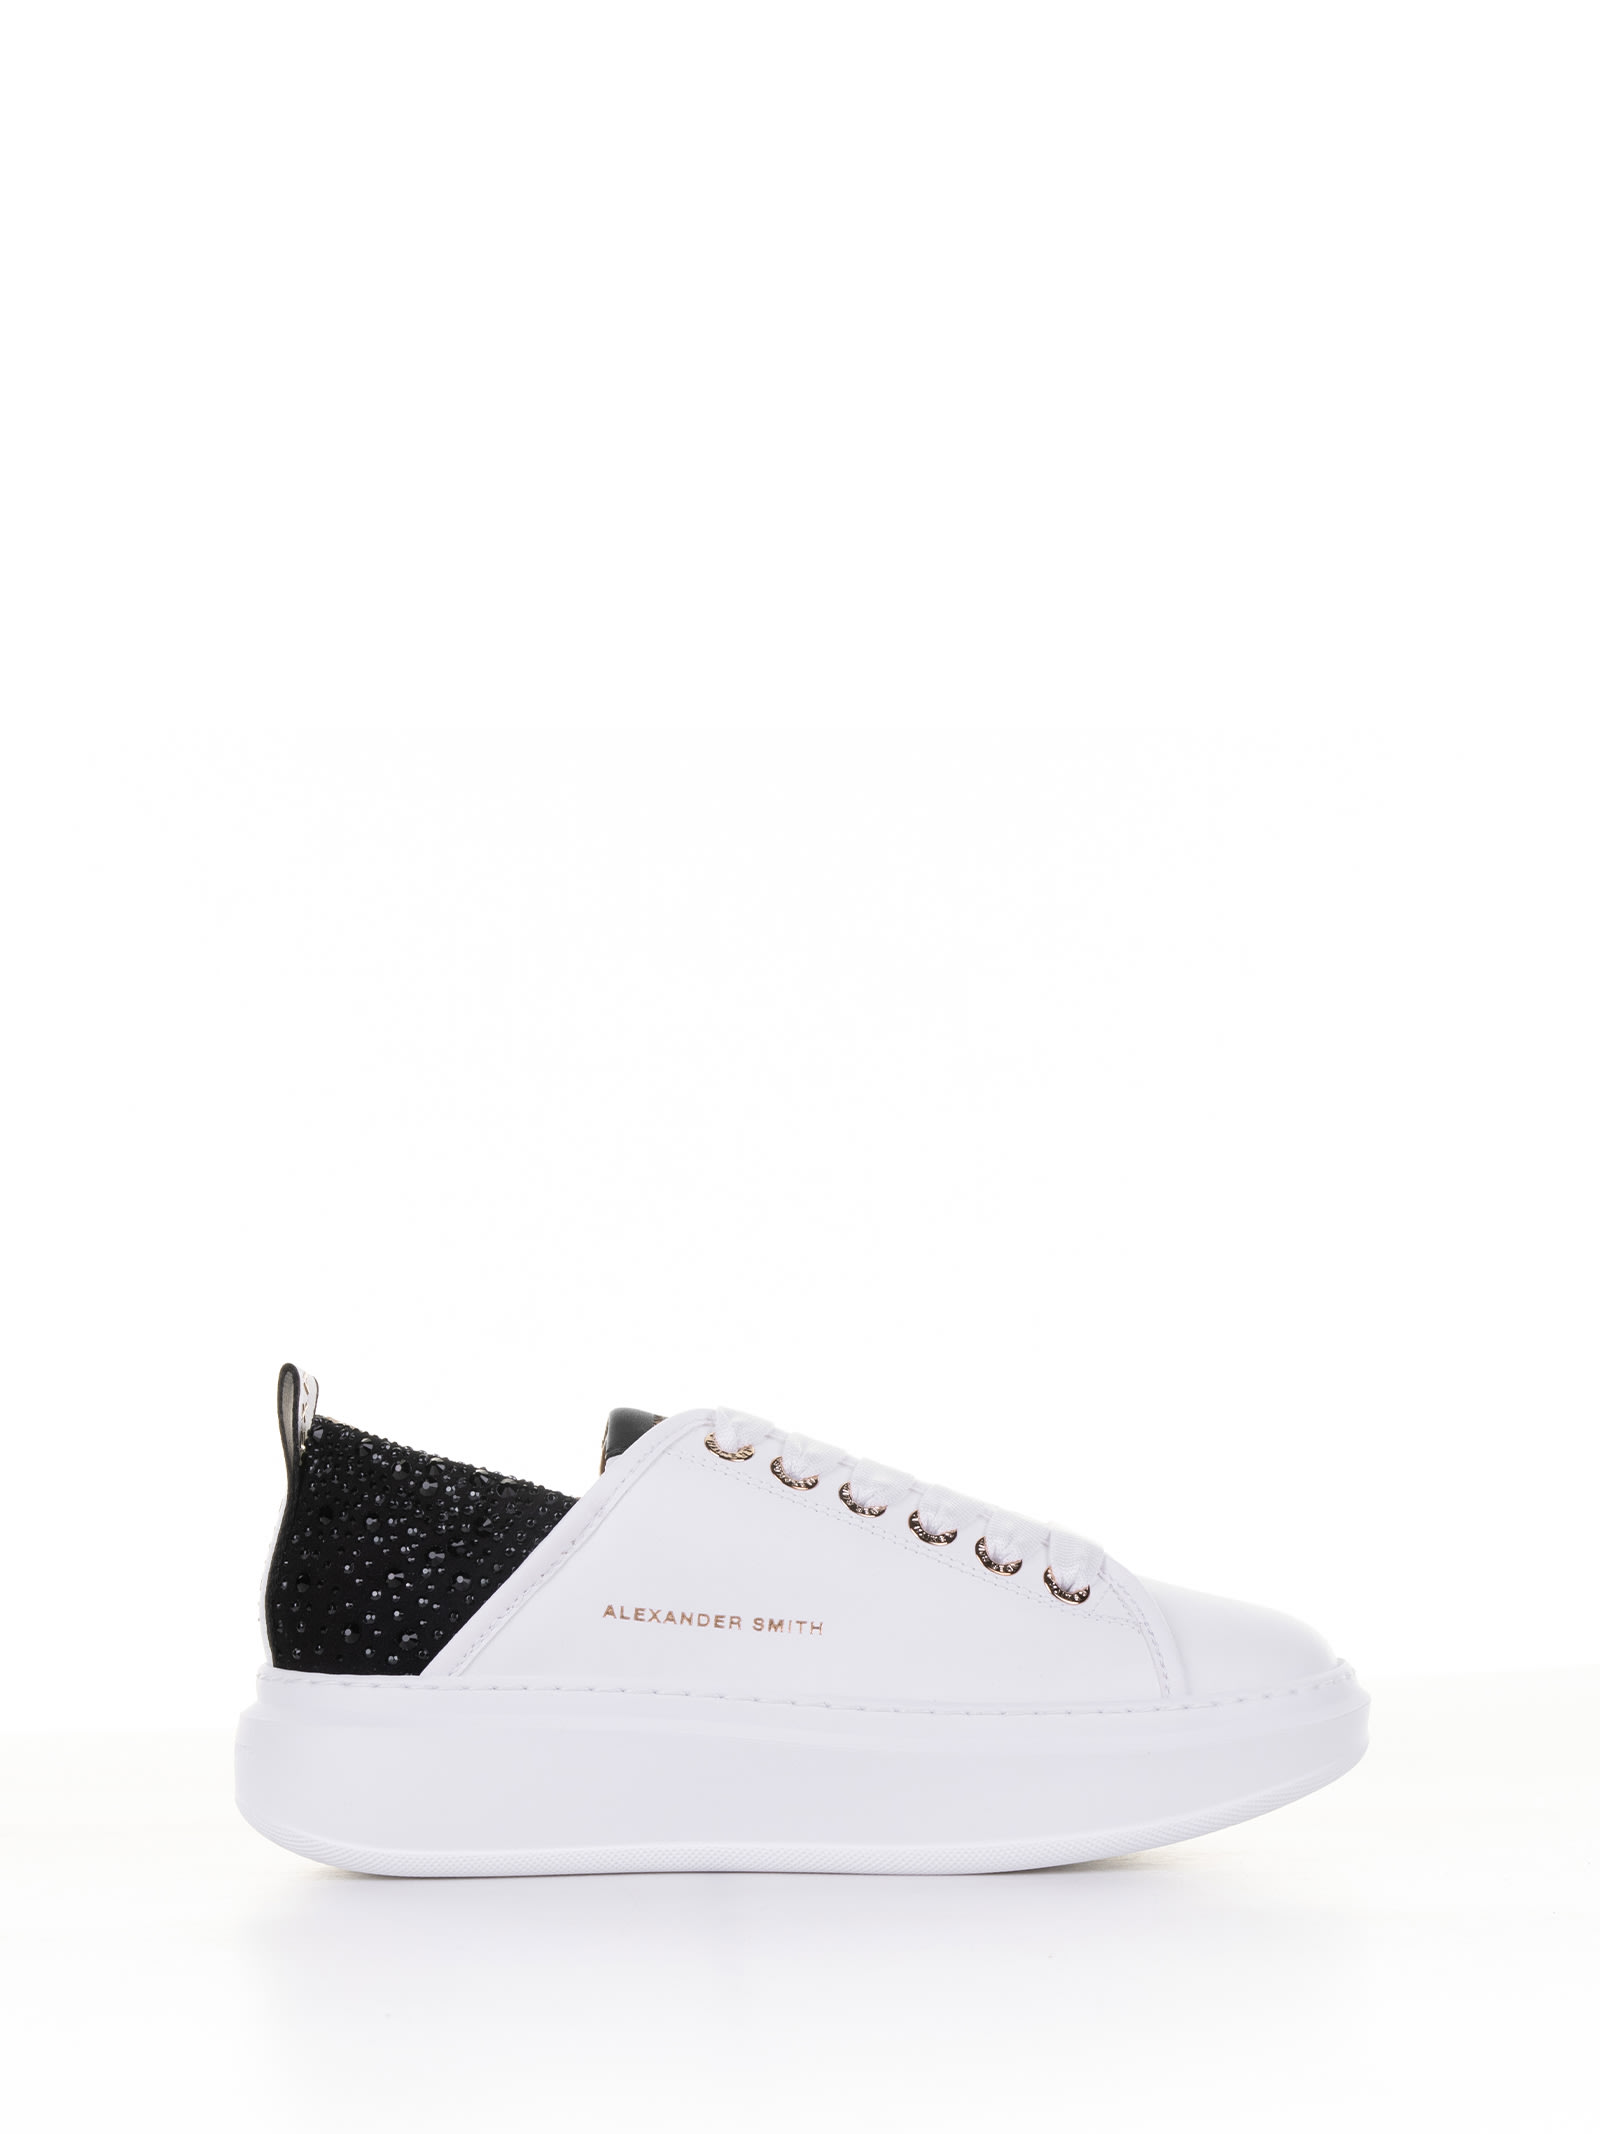 Alexander Smith Wembley Trainer In Leather And Rhinestones In White Black